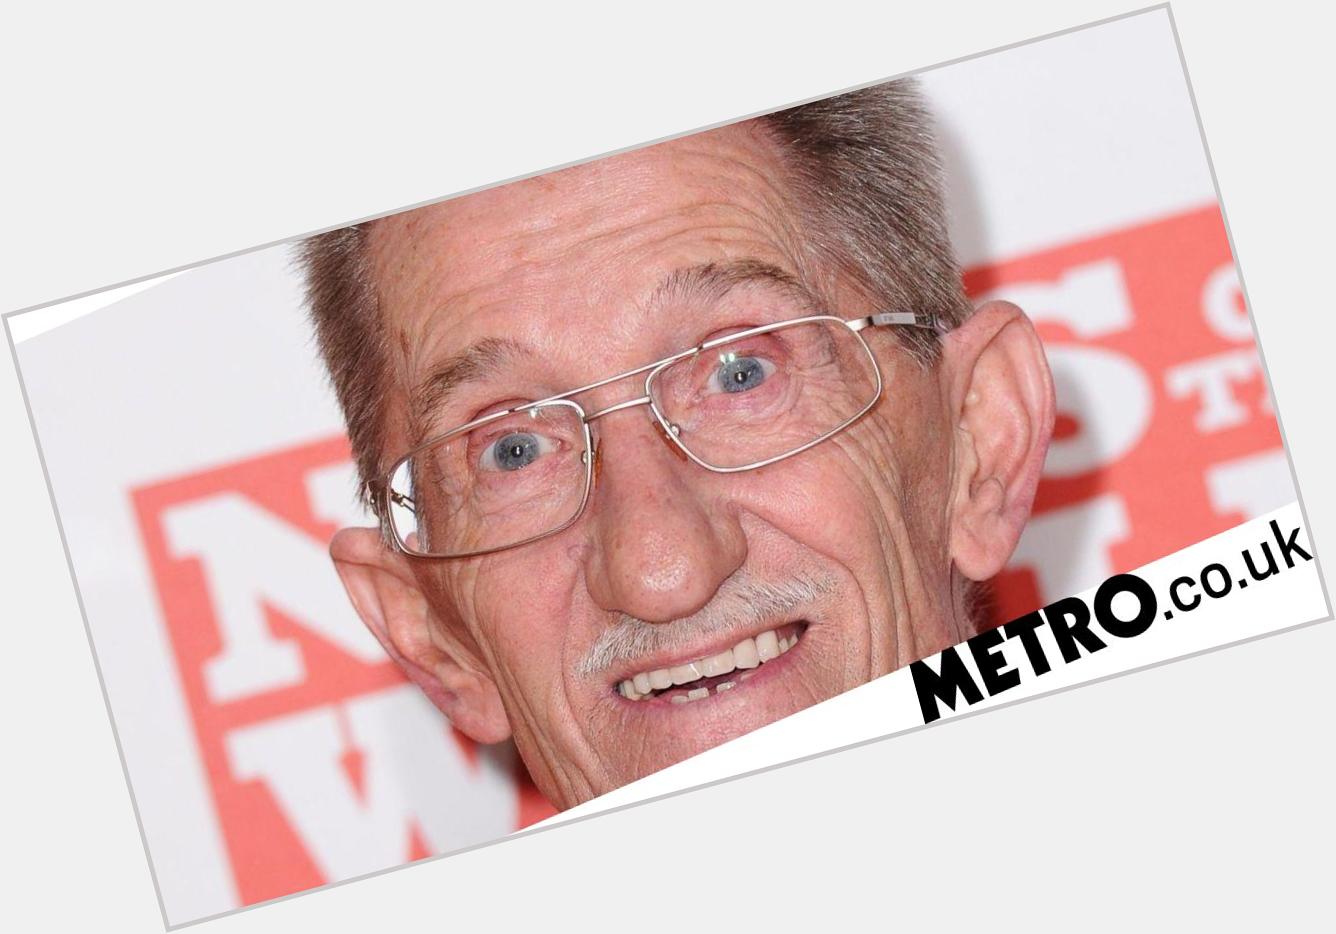 Barry Chuckle marriage 3